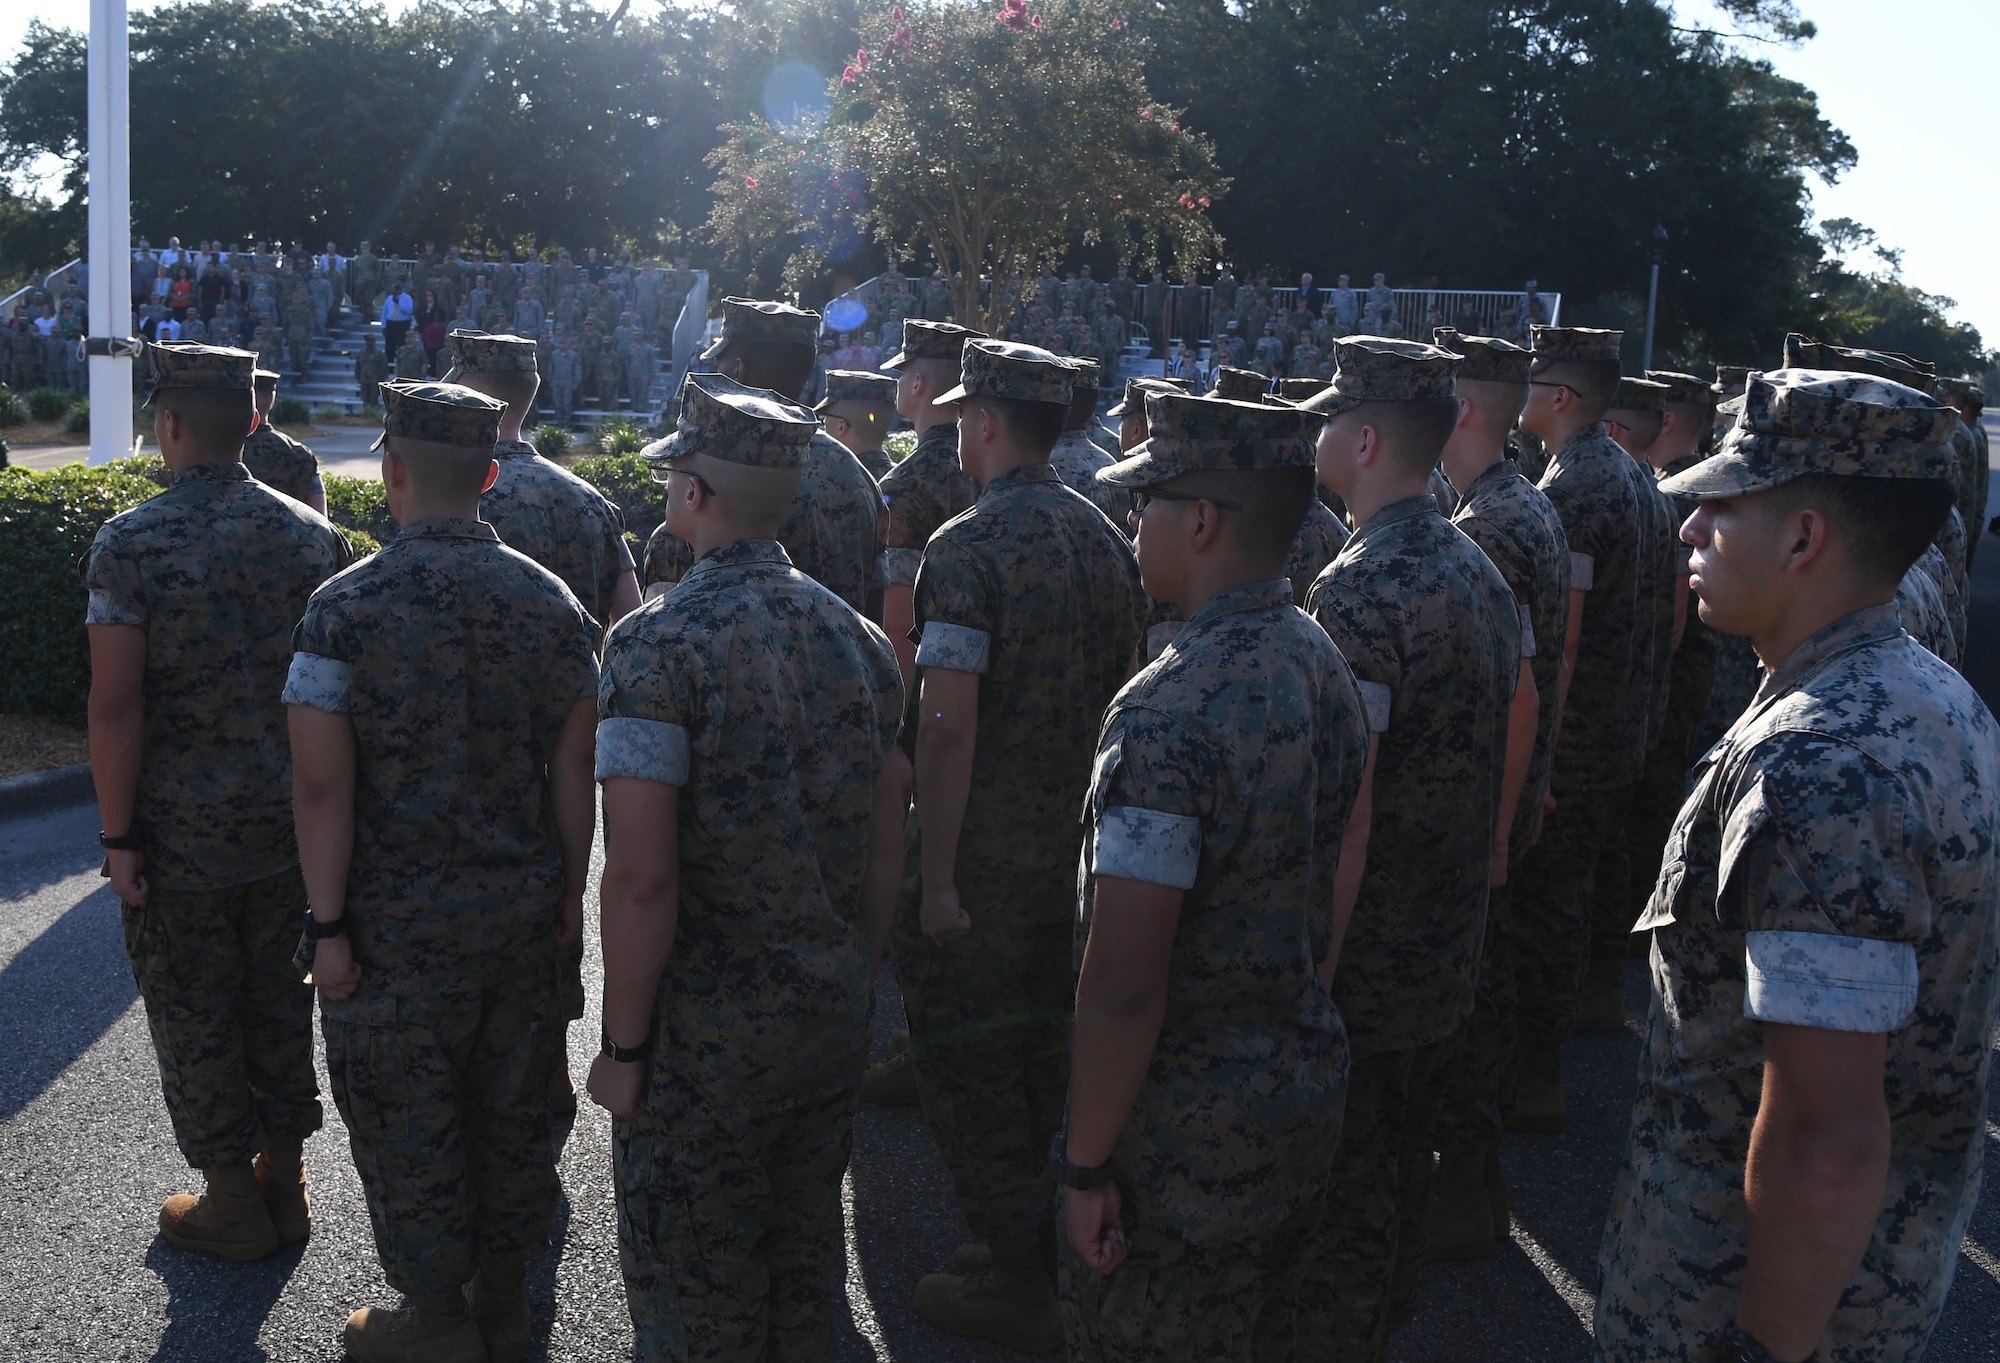 Members of the Keesler Marine Detachment stand in formation during a 9/11 memorial ceremony hosted by the Center for Naval Aviation Technical Training Unit Keesler in front of the 81st Training Wing headquarters building on Keesler Air Force Base, Mississippi, Sept. 11, 2019. The event honored those who lost their lives during the 9/11 attacks. (U.S. Air Force photo by Kemberly Groue)